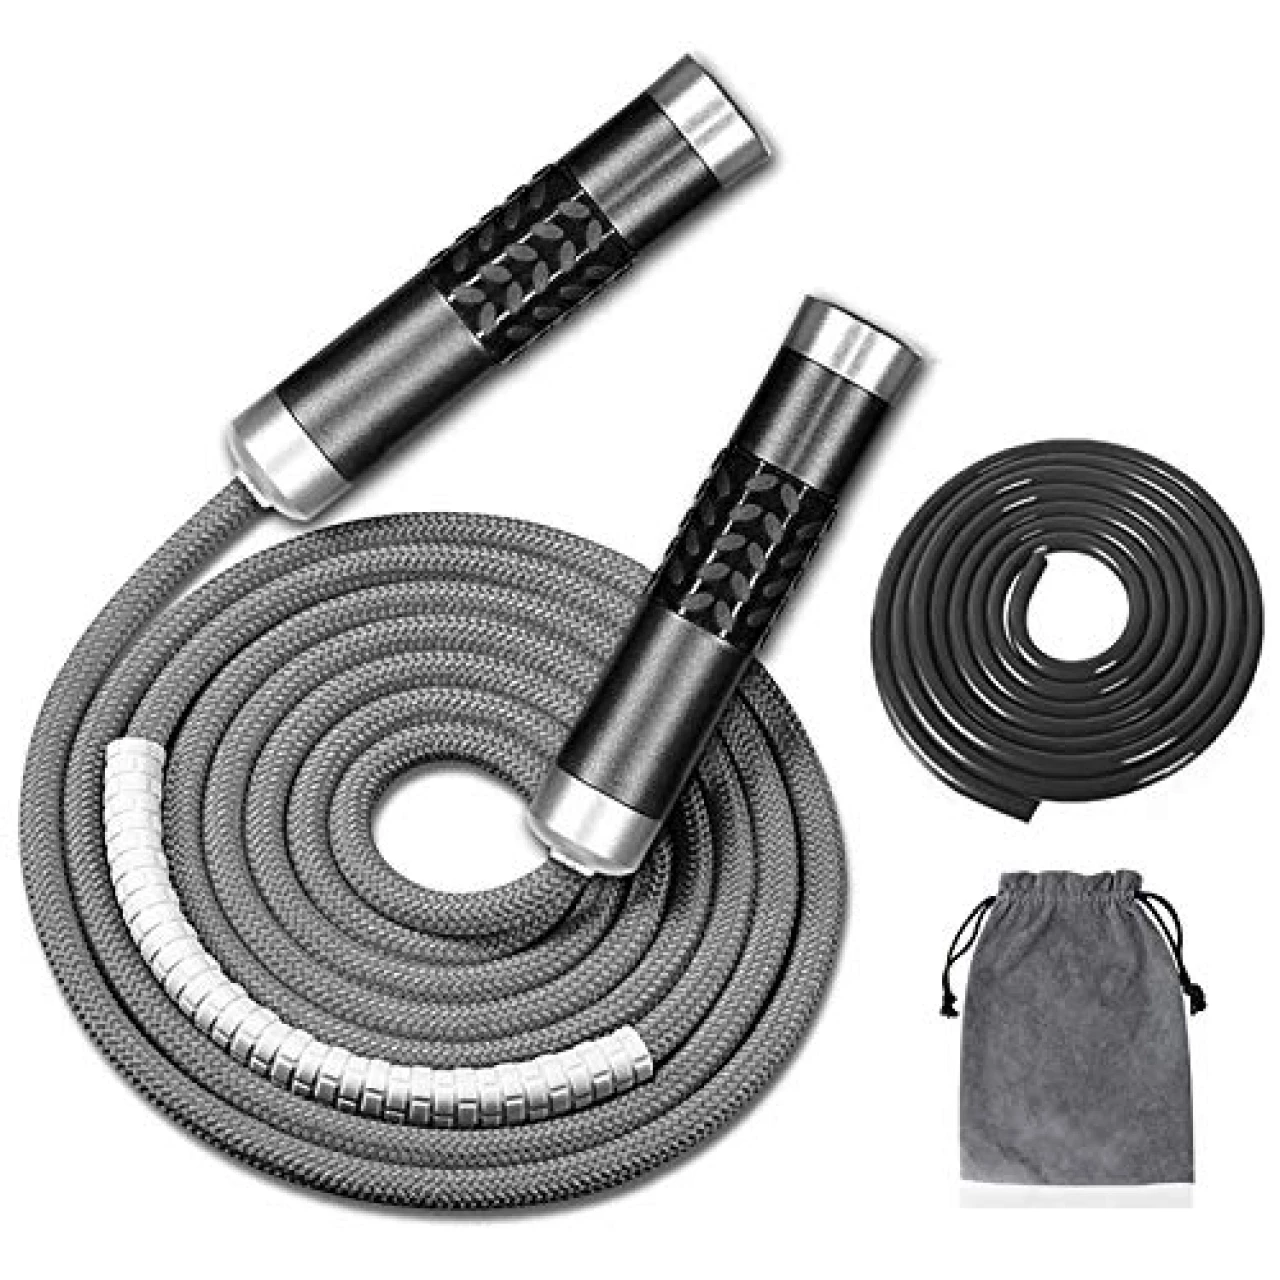 Redify Weighted Jump Rope for Workout Fitness(1LB), Tangle-Free Ball Bearing Rapid Speed Skipping Rope